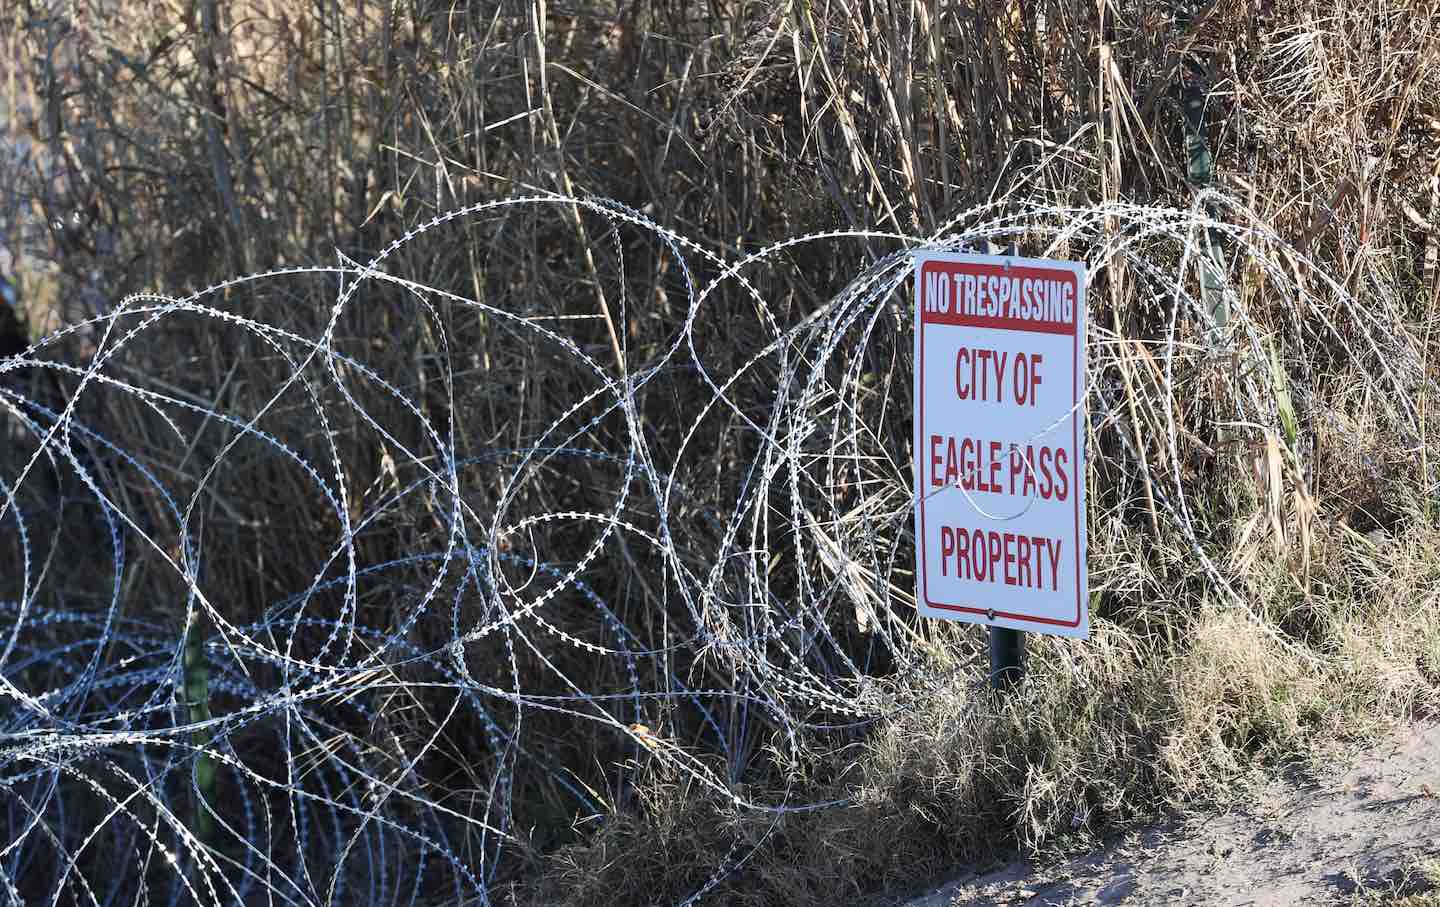 Texas National Guards place razor wires at the Shelby Park area as the guards continue to patrol the Rio Grande River, even though the US Supreme Court abolished this decision, on January 29, 2024, in Texas.